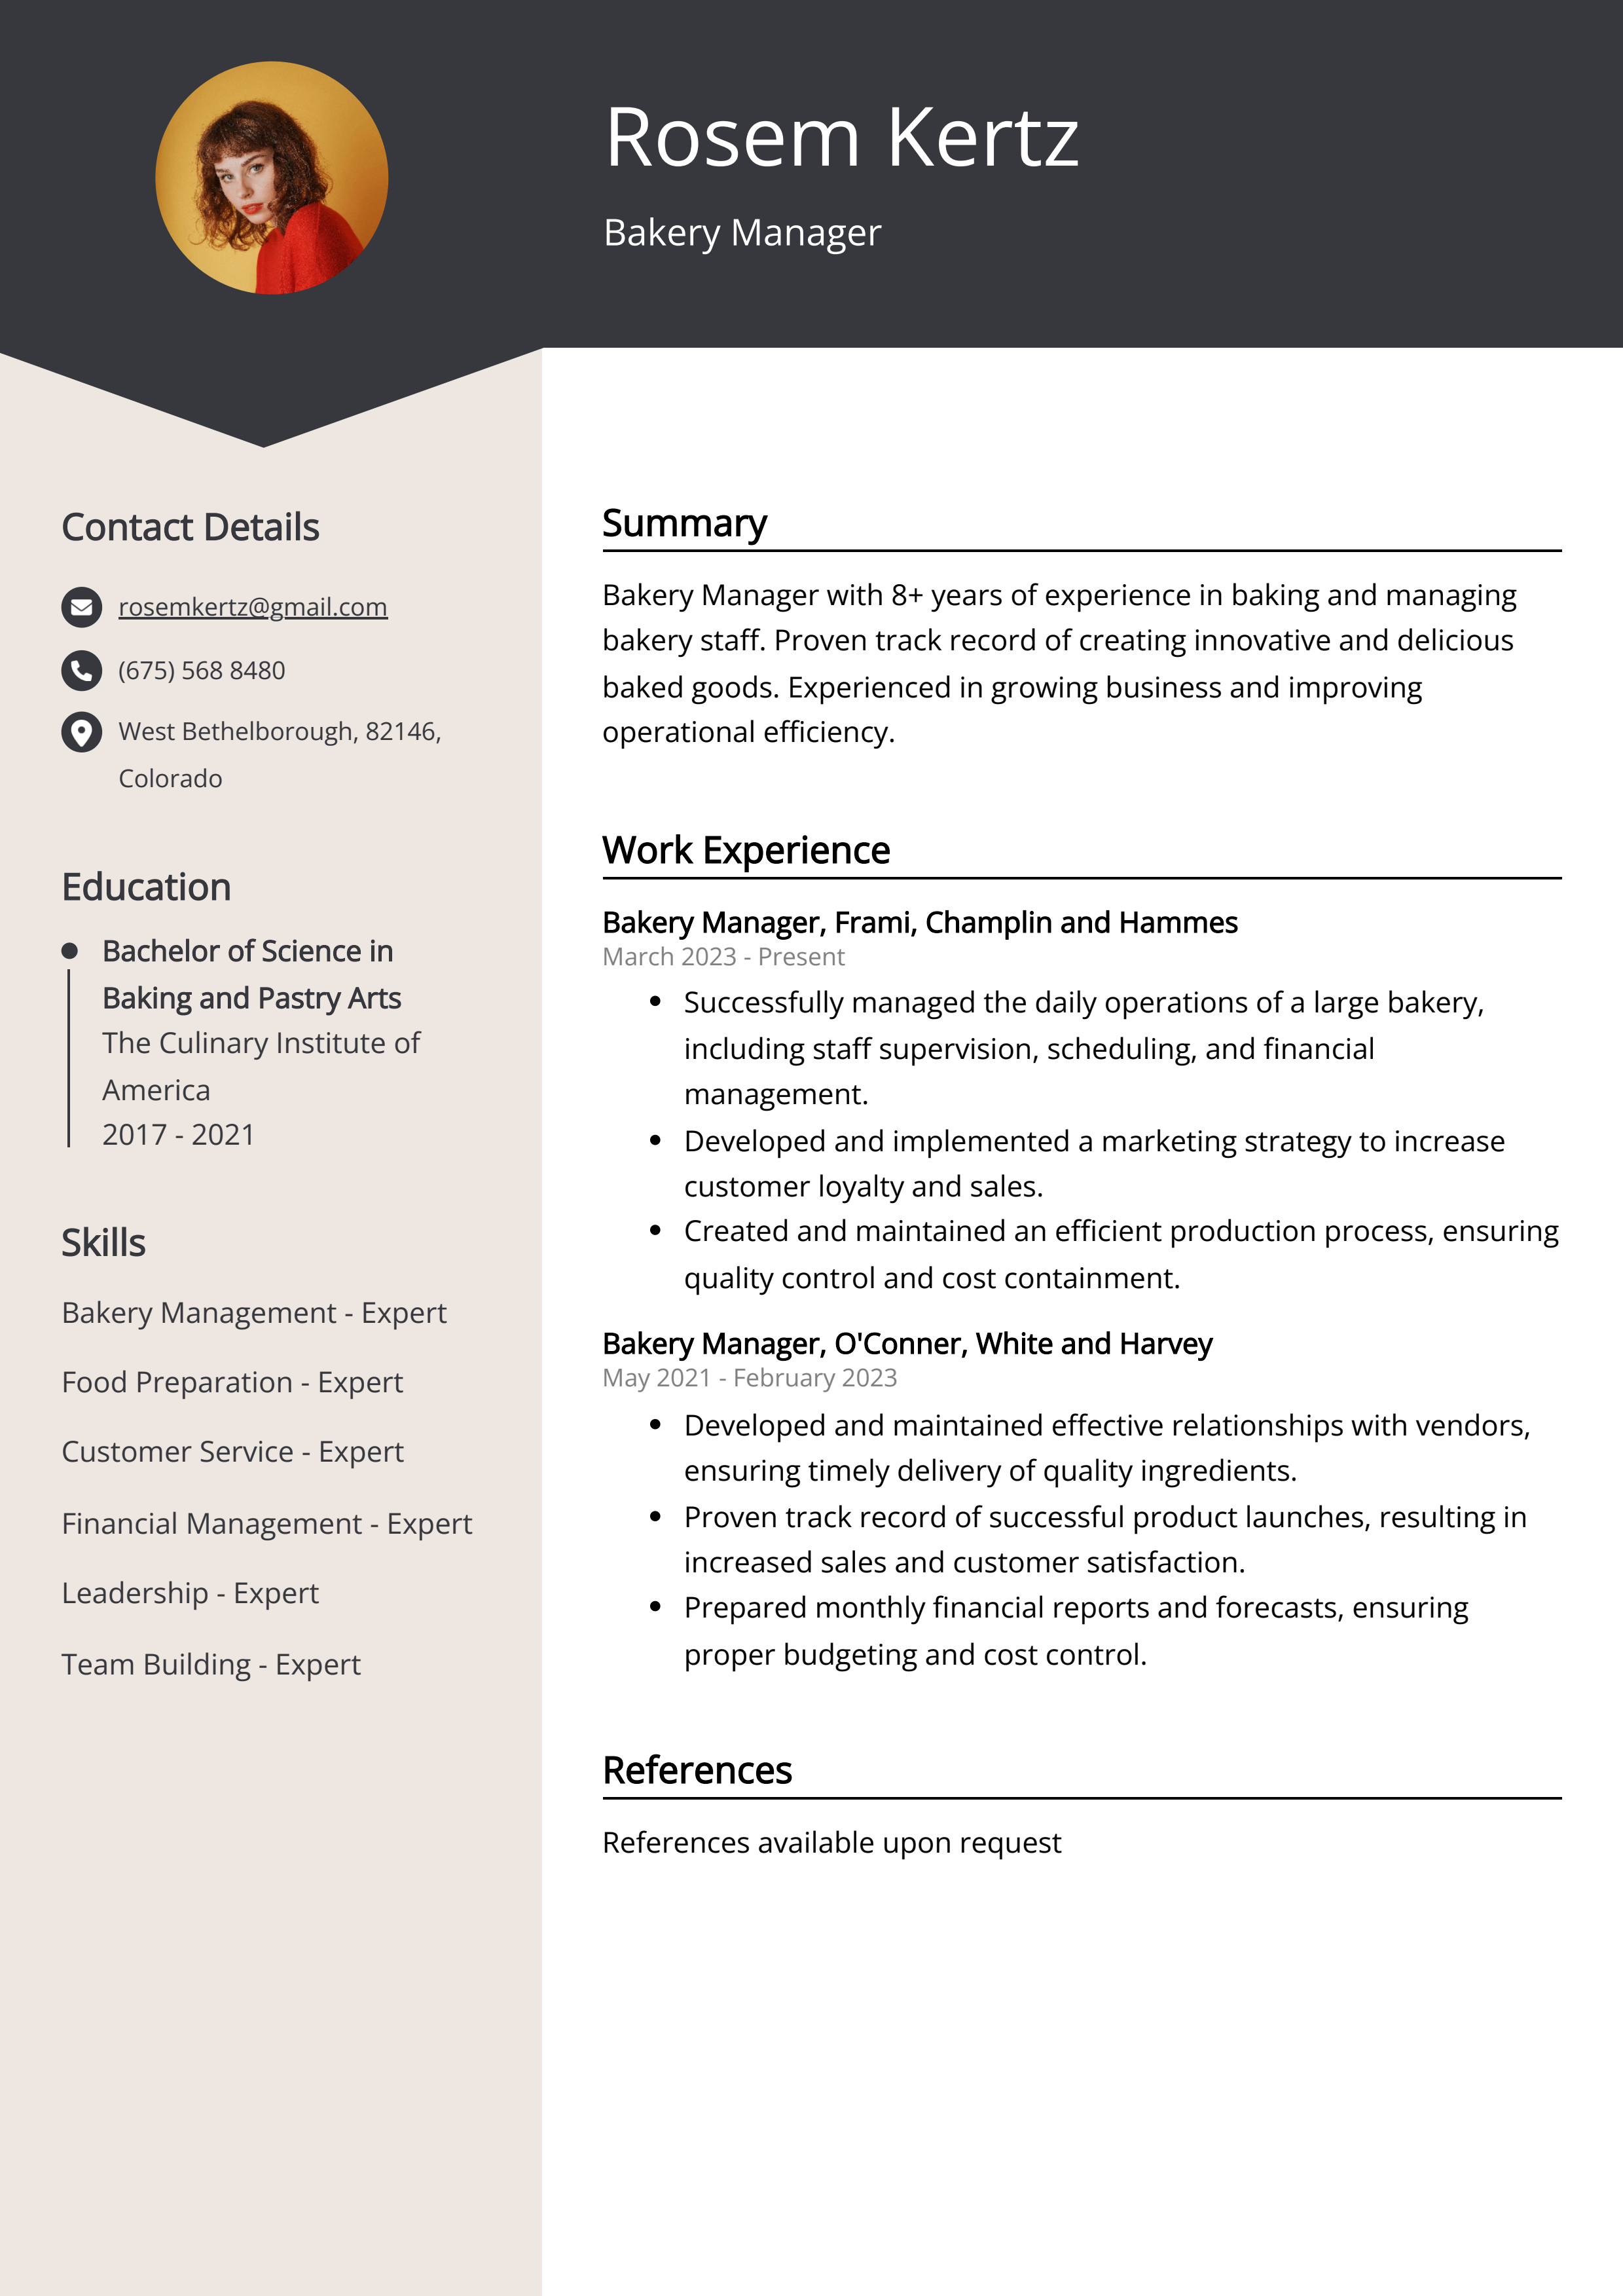 Bakery Manager Resume Example